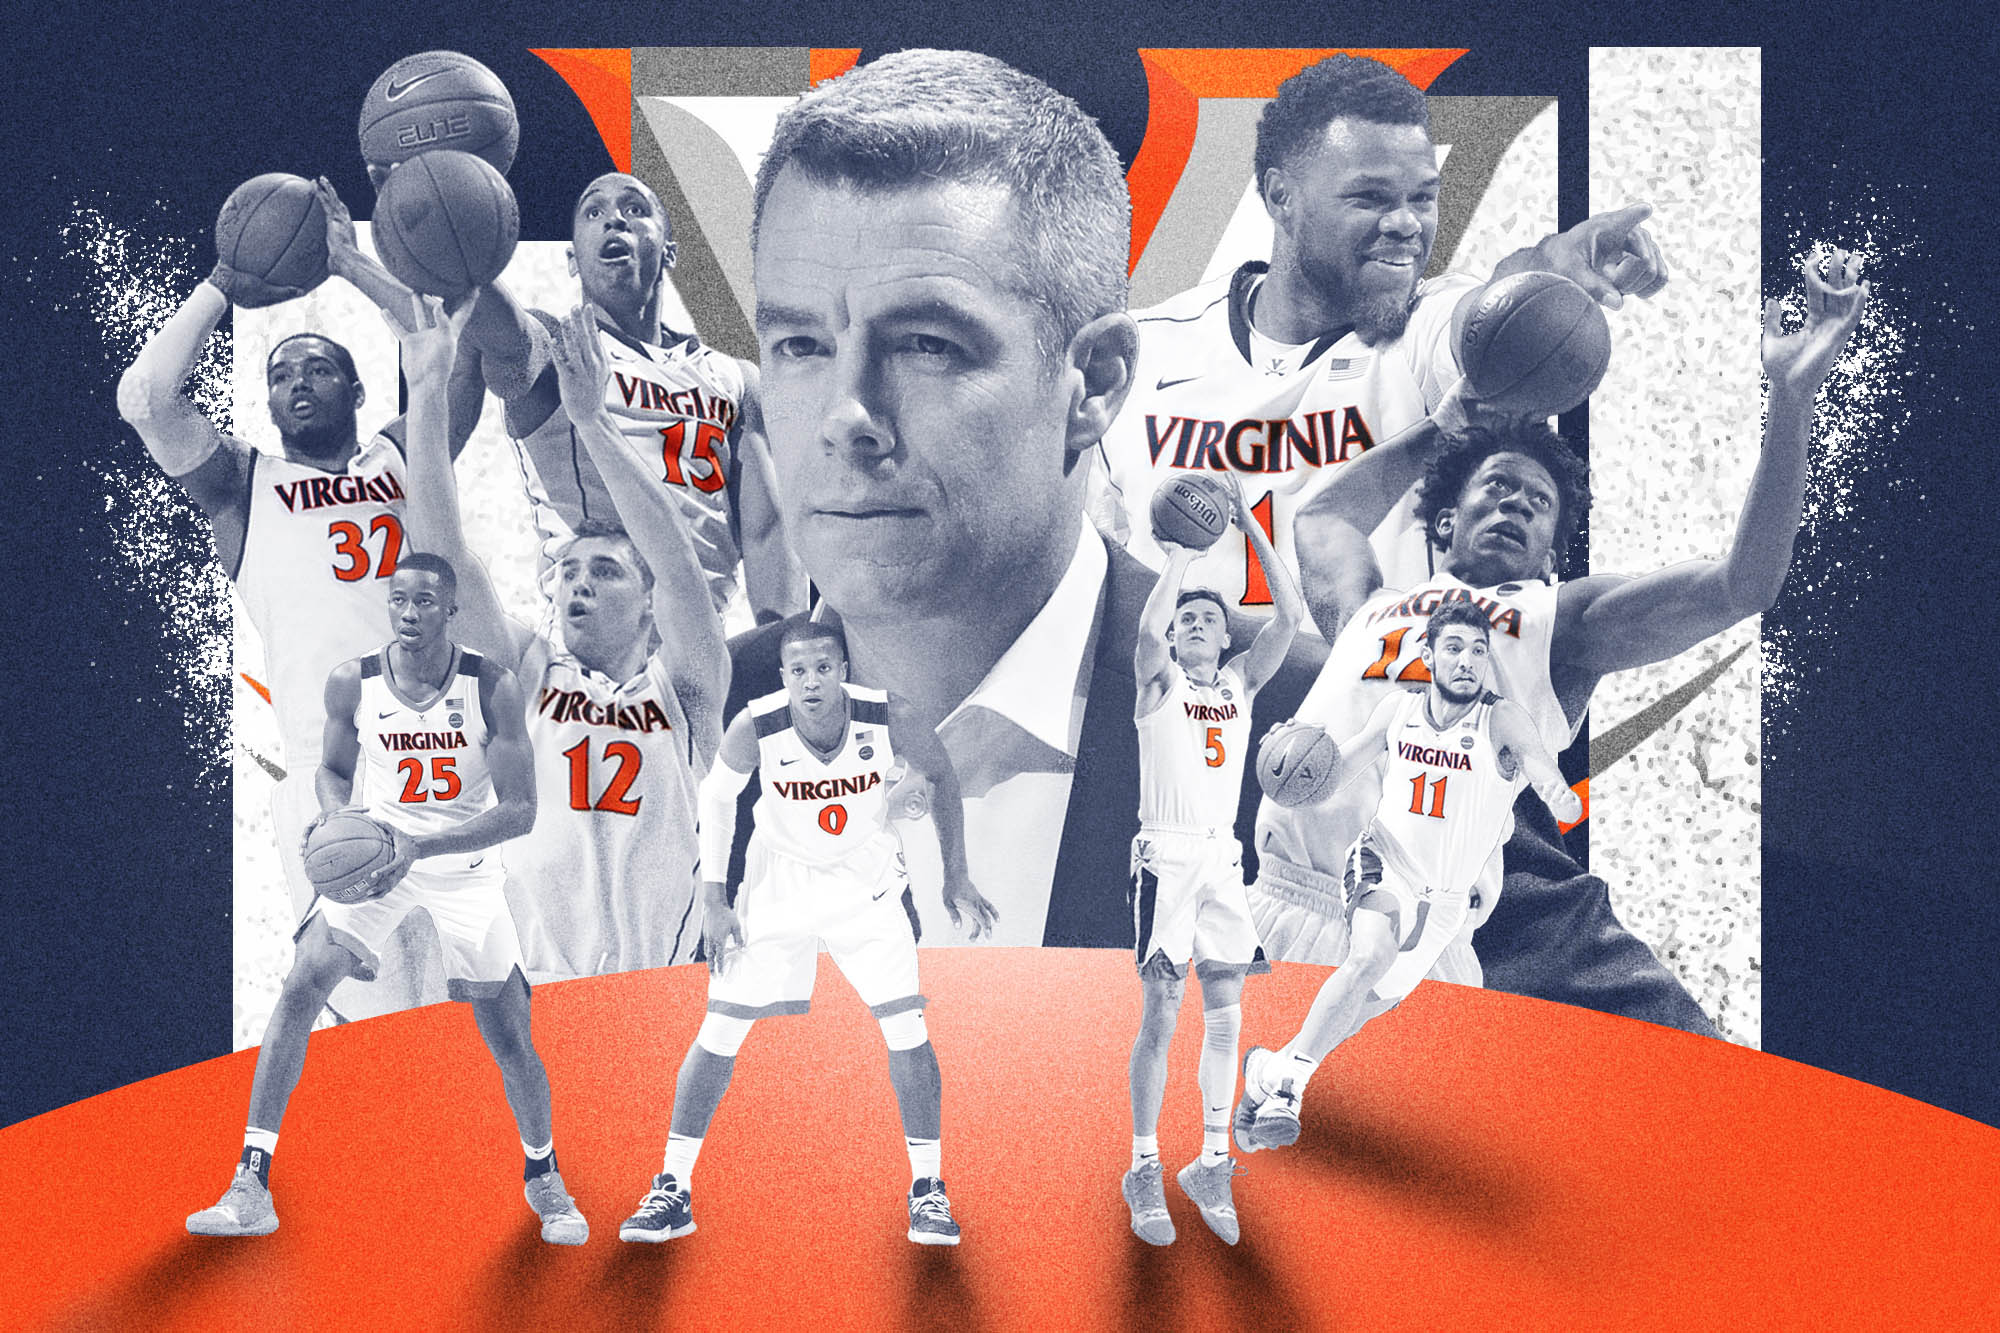 A River Runs Through: Pipeline of Players From UVA to NBA Is Strong | UVA Today